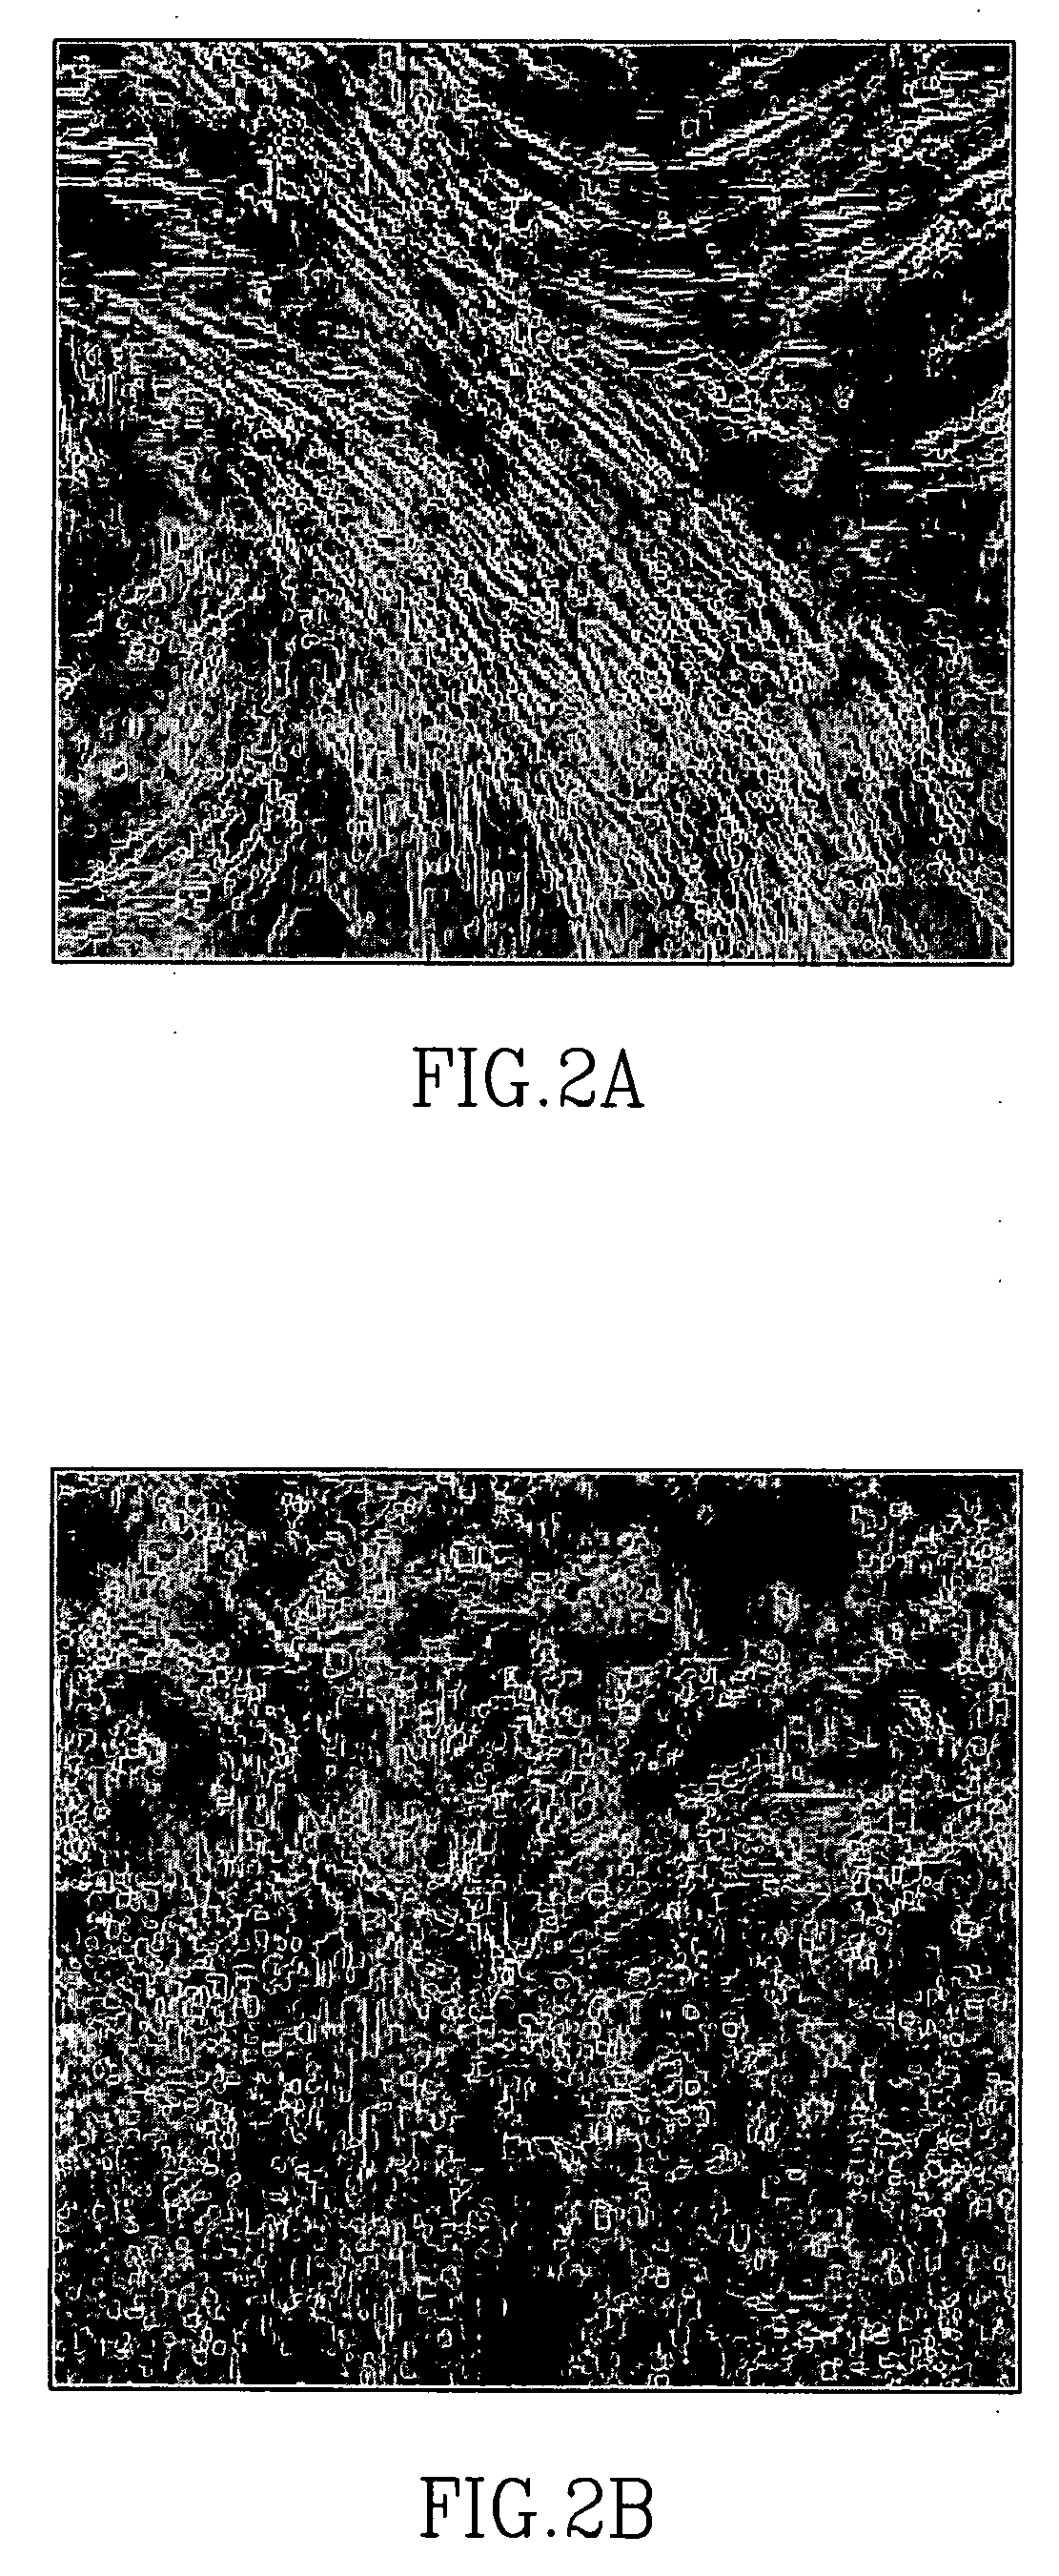 Methods of implating mesenchymal stem cells for tissue repair and formation